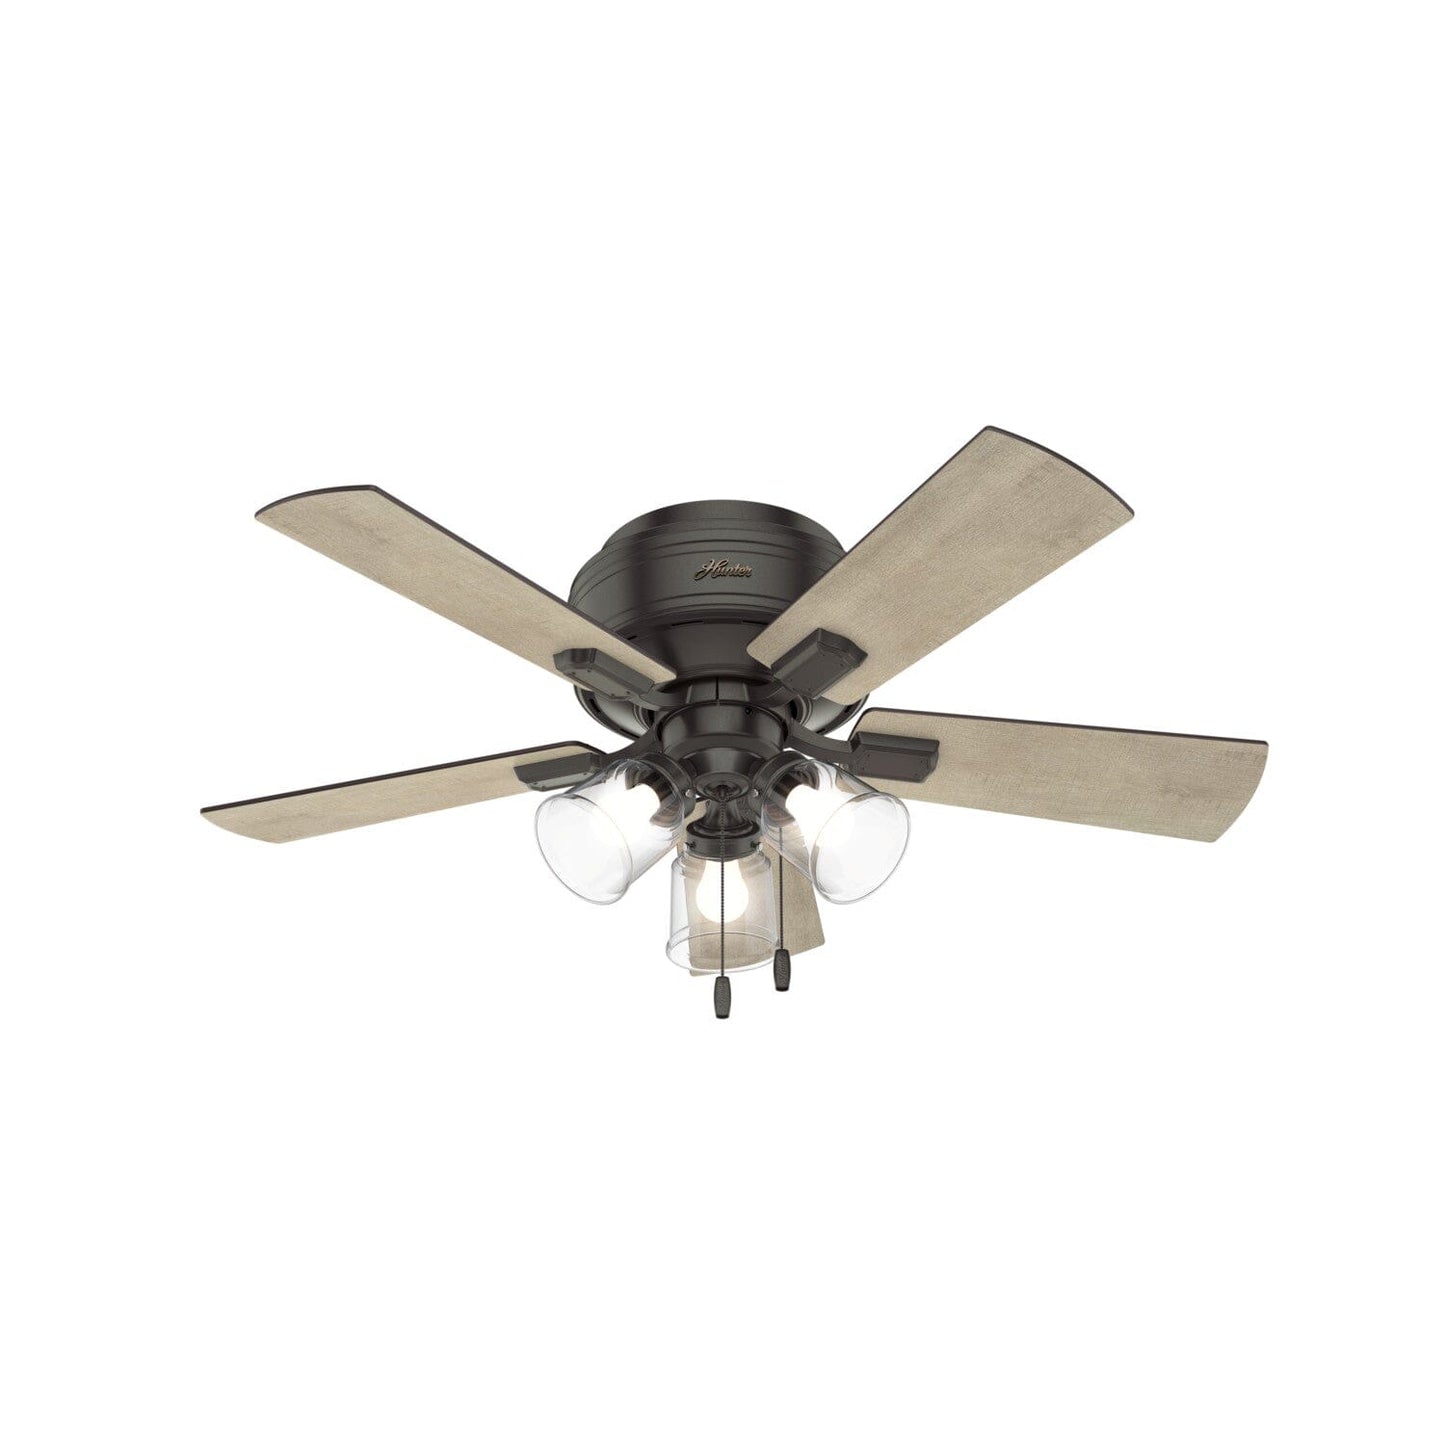 Crestfield Low Profile with 3 Lights 42 inch Ceiling Fans Hunter Noble Bronze - Bleached Grey Pine 